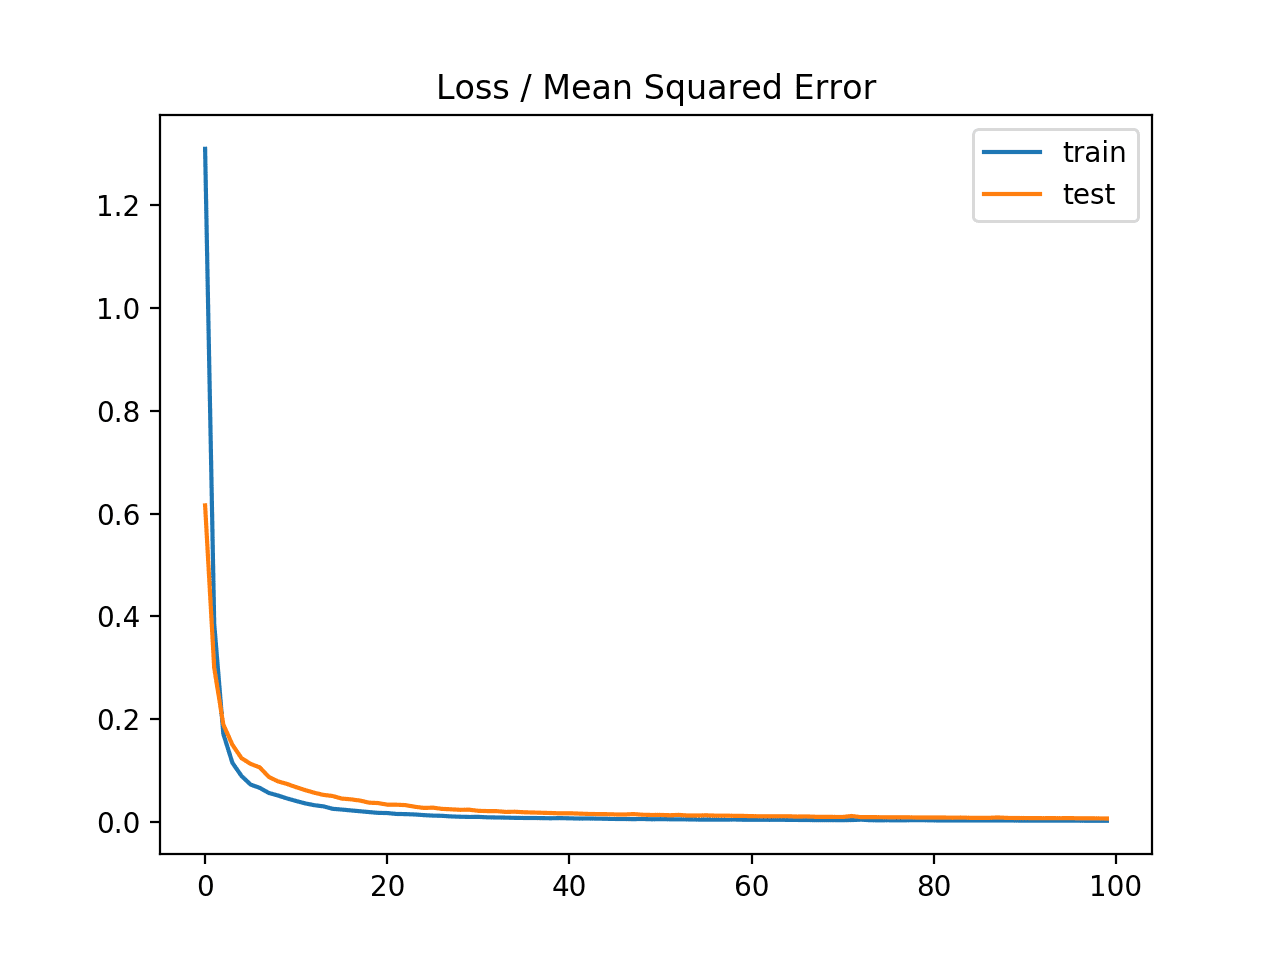 Line Plot of Mean Squared Error on the Train a Test Datasets for Each Training Epoch